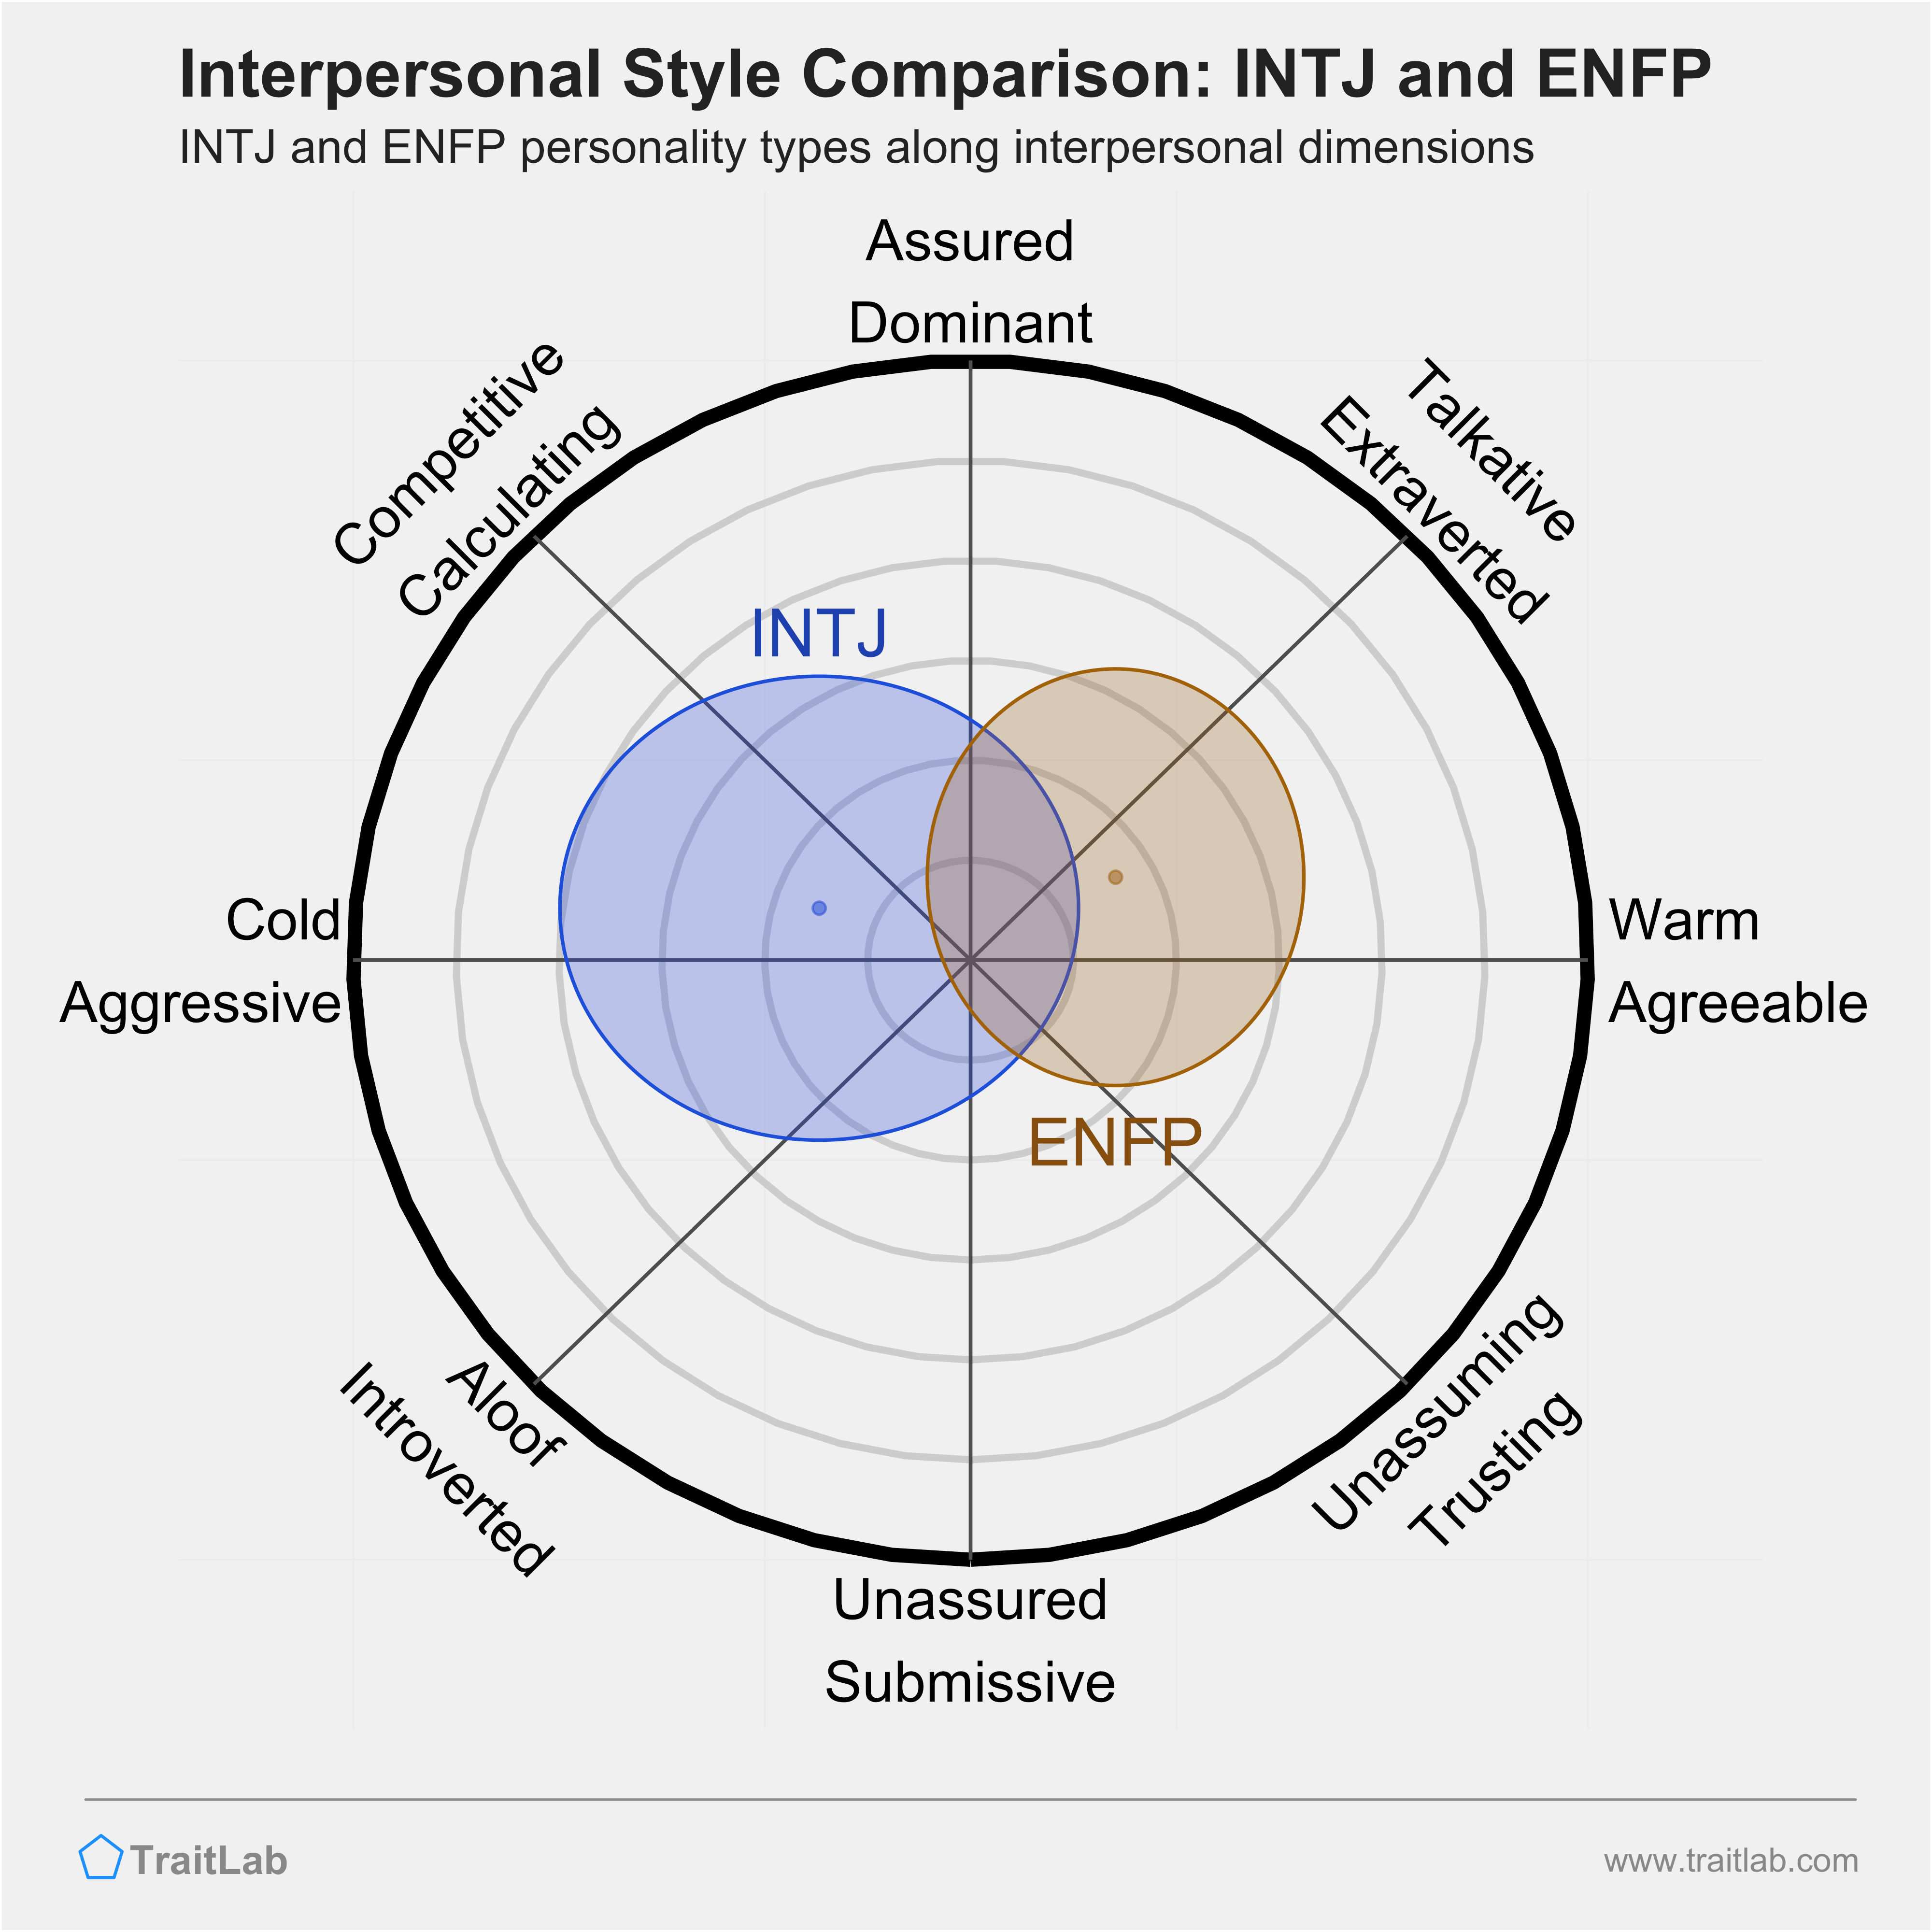 INTJ and ENFP comparison across interpersonal dimensions